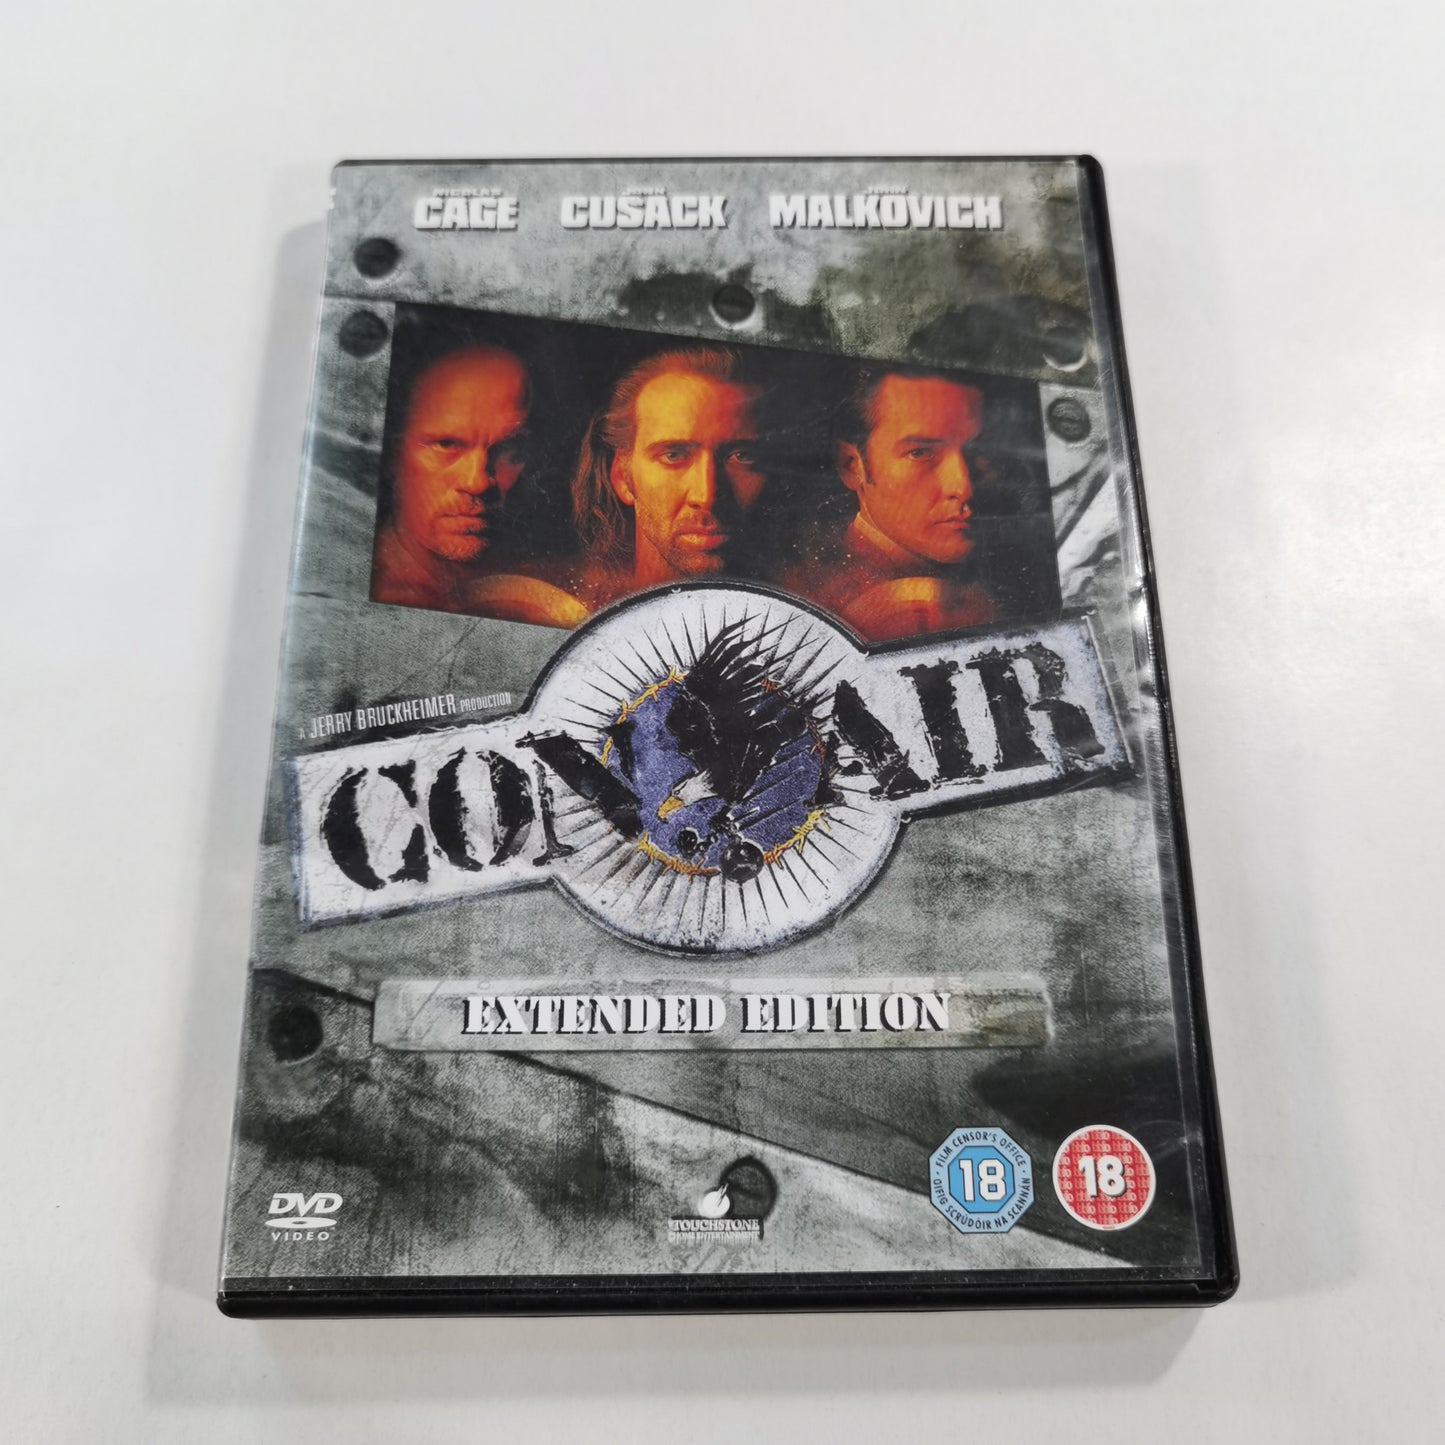 Con Air (1997) - DVD UK Extended Edition